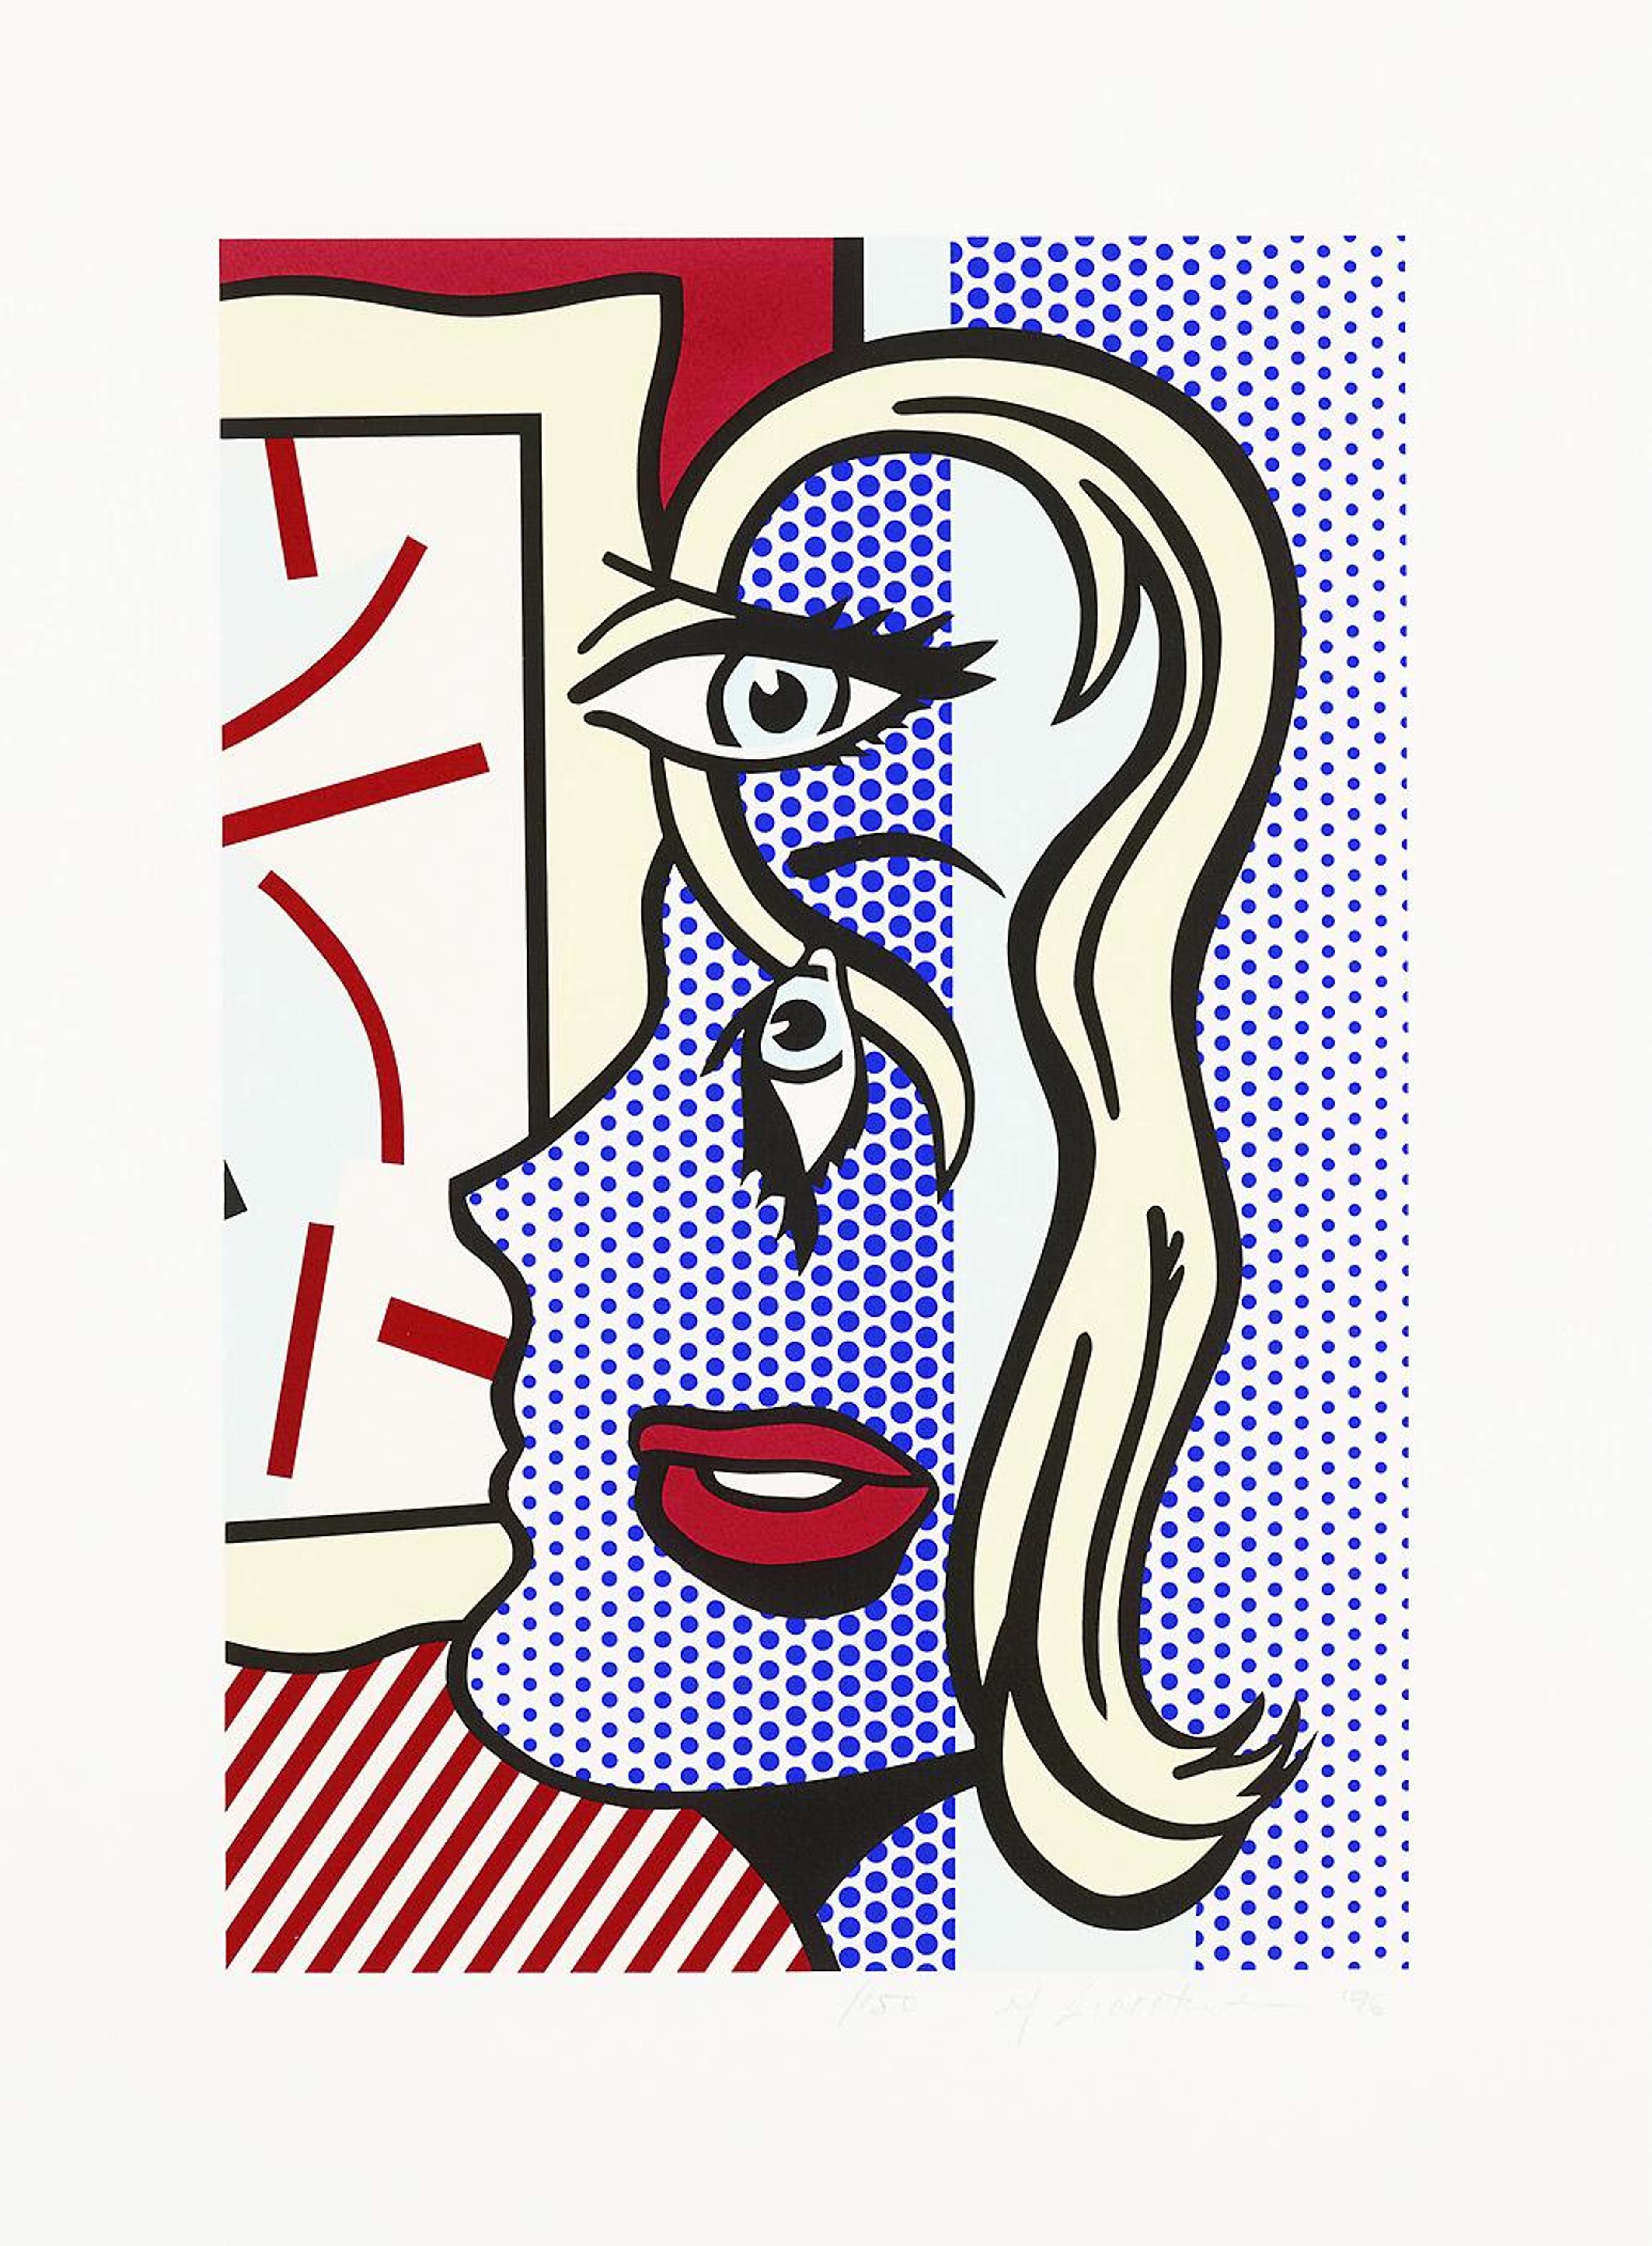 Roy Lichtenstein’s Art Critic. A Pop Art screenprint of a comic strip of a Cubist portrayal of a woman comprised of blue Ben-day dots against a red and white background.